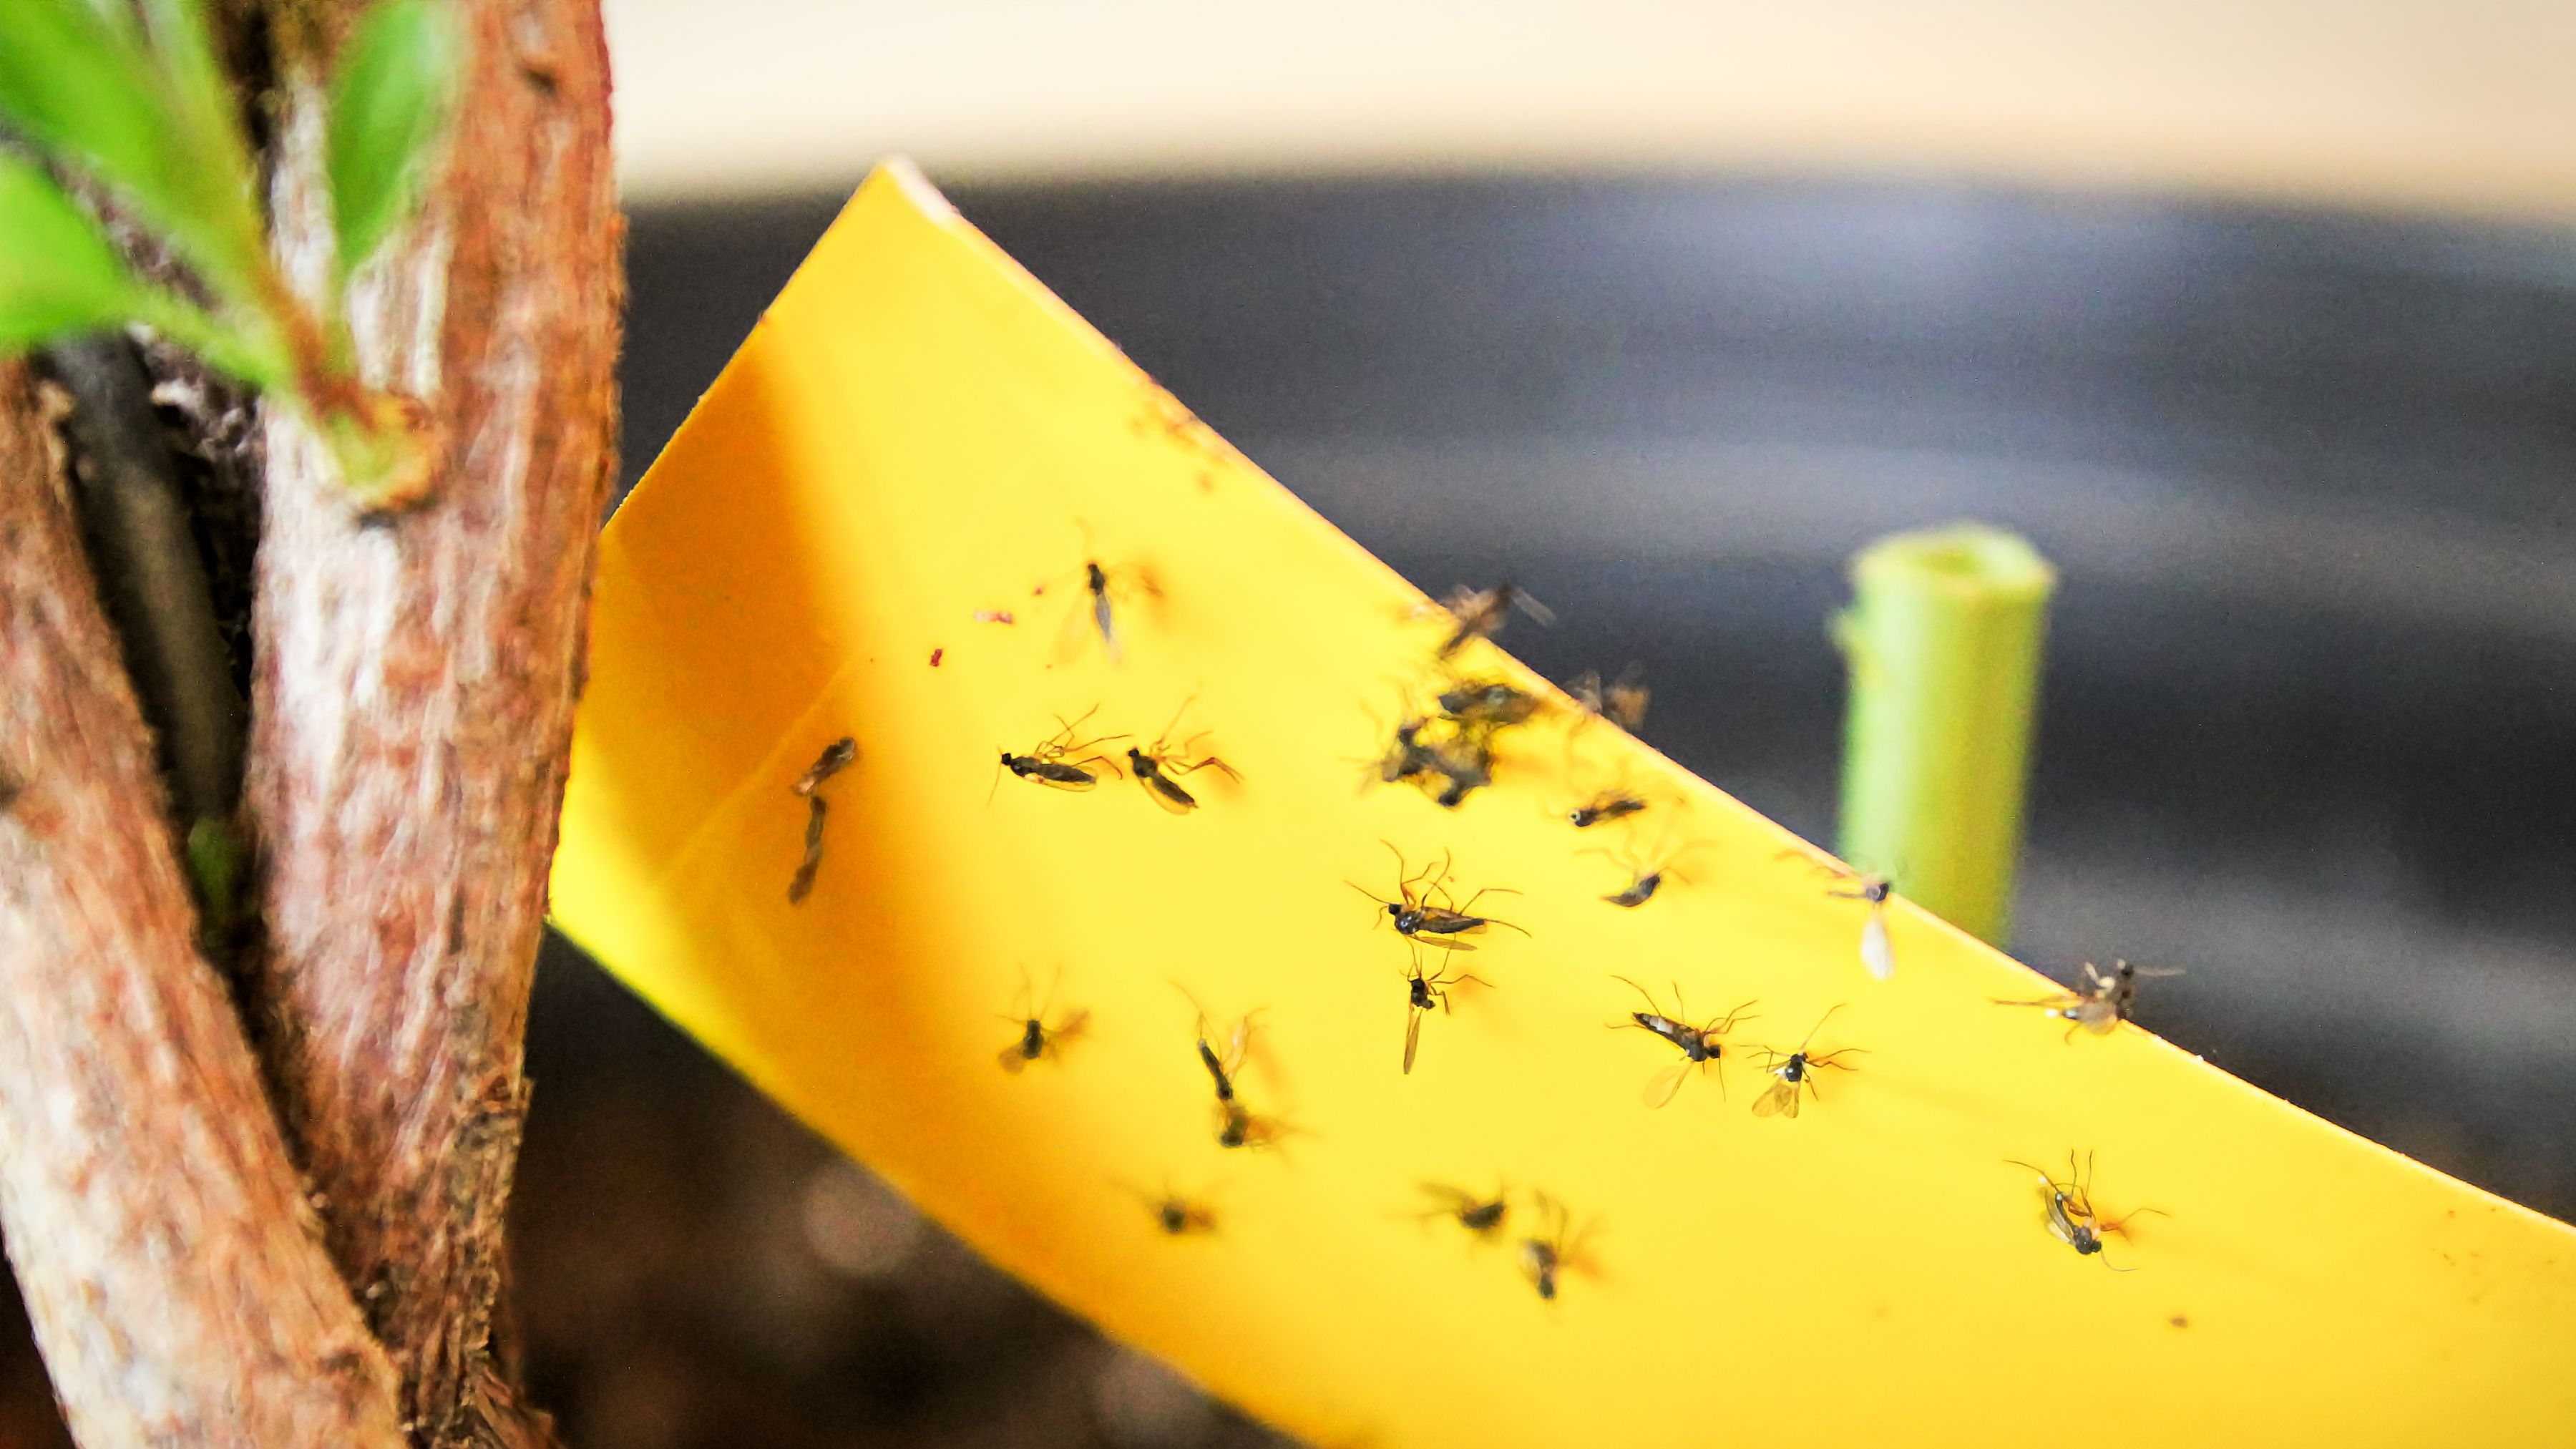 https://hips.hearstapps.com/hmg-prod/images/closeup-of-fungus-gnats-being-stuck-to-yellow-royalty-free-image-1590690431.jpg?crop=1xw:0.84375xh;center,top